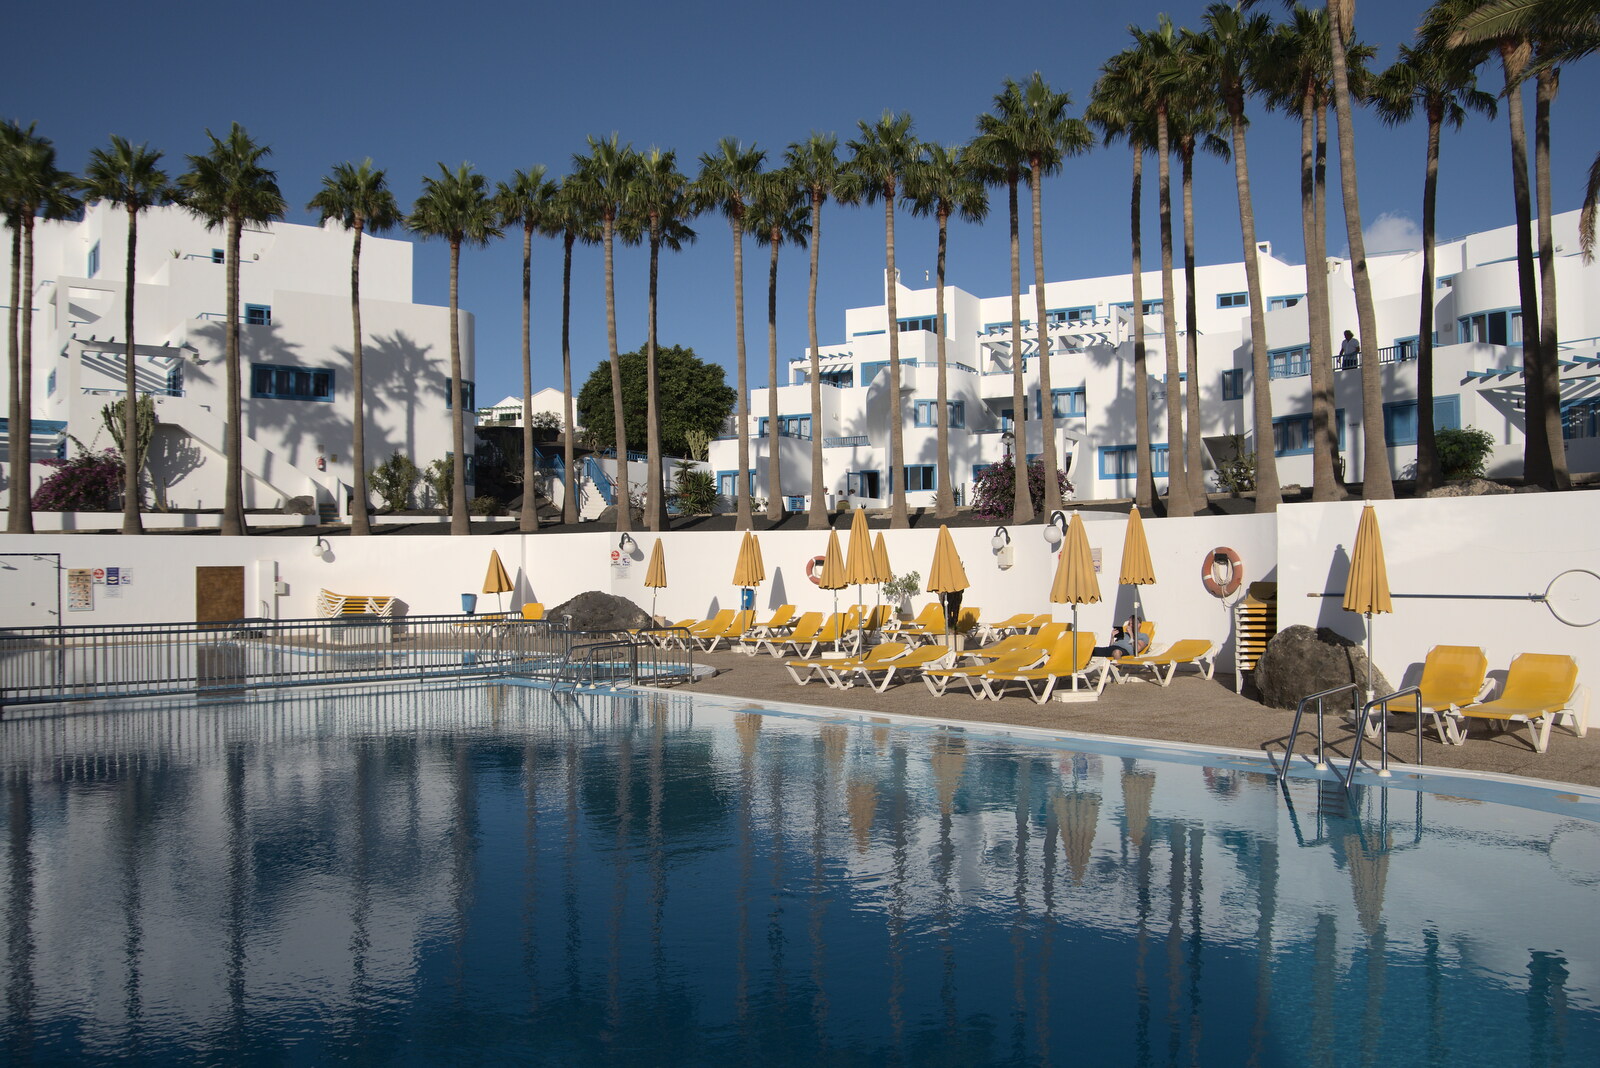 The pool is quiet in the morning from Five Days in Lanzarote, Canary Islands, Spain - 24th October 2021